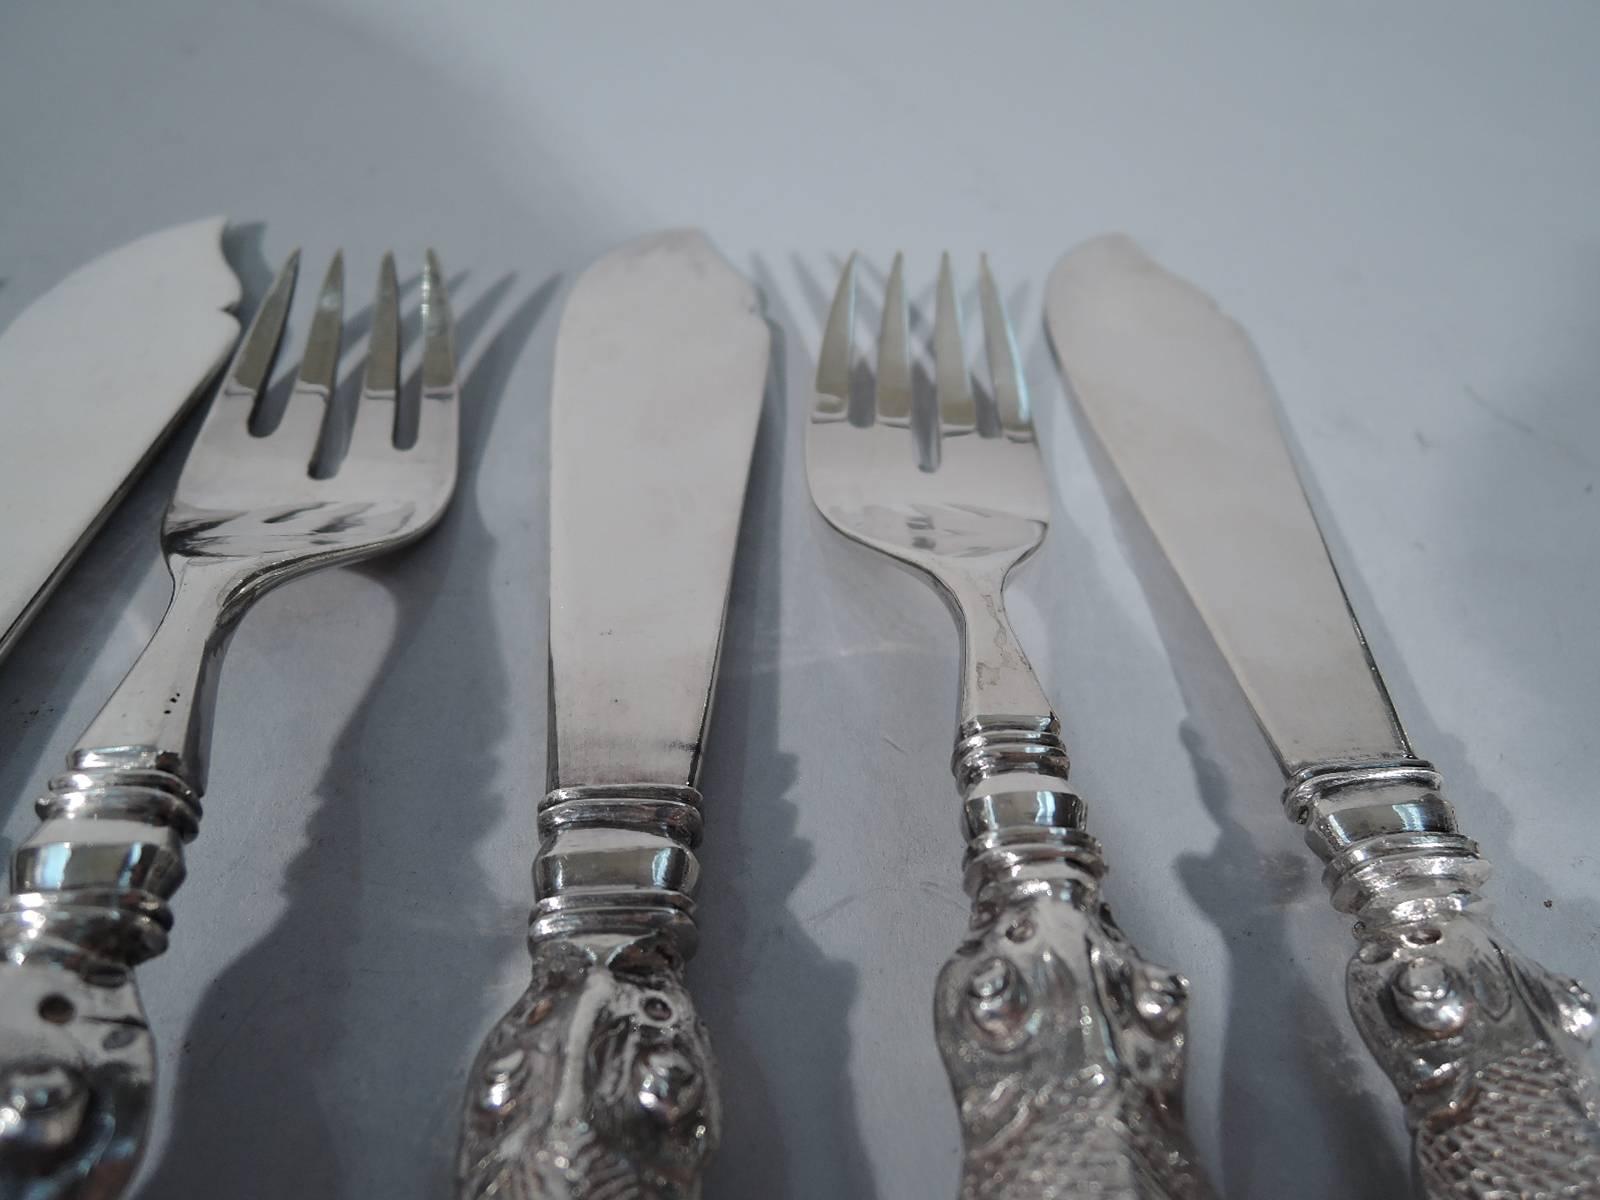 Chinese export silver fish set, circa 1900. This set comprises six forks and six knives. Each handle is a fish (carp) with scales, pierced tail, fins, and exophthalmic eyes. A practical adaptation of a popular Asian motif. Forks have curved shank